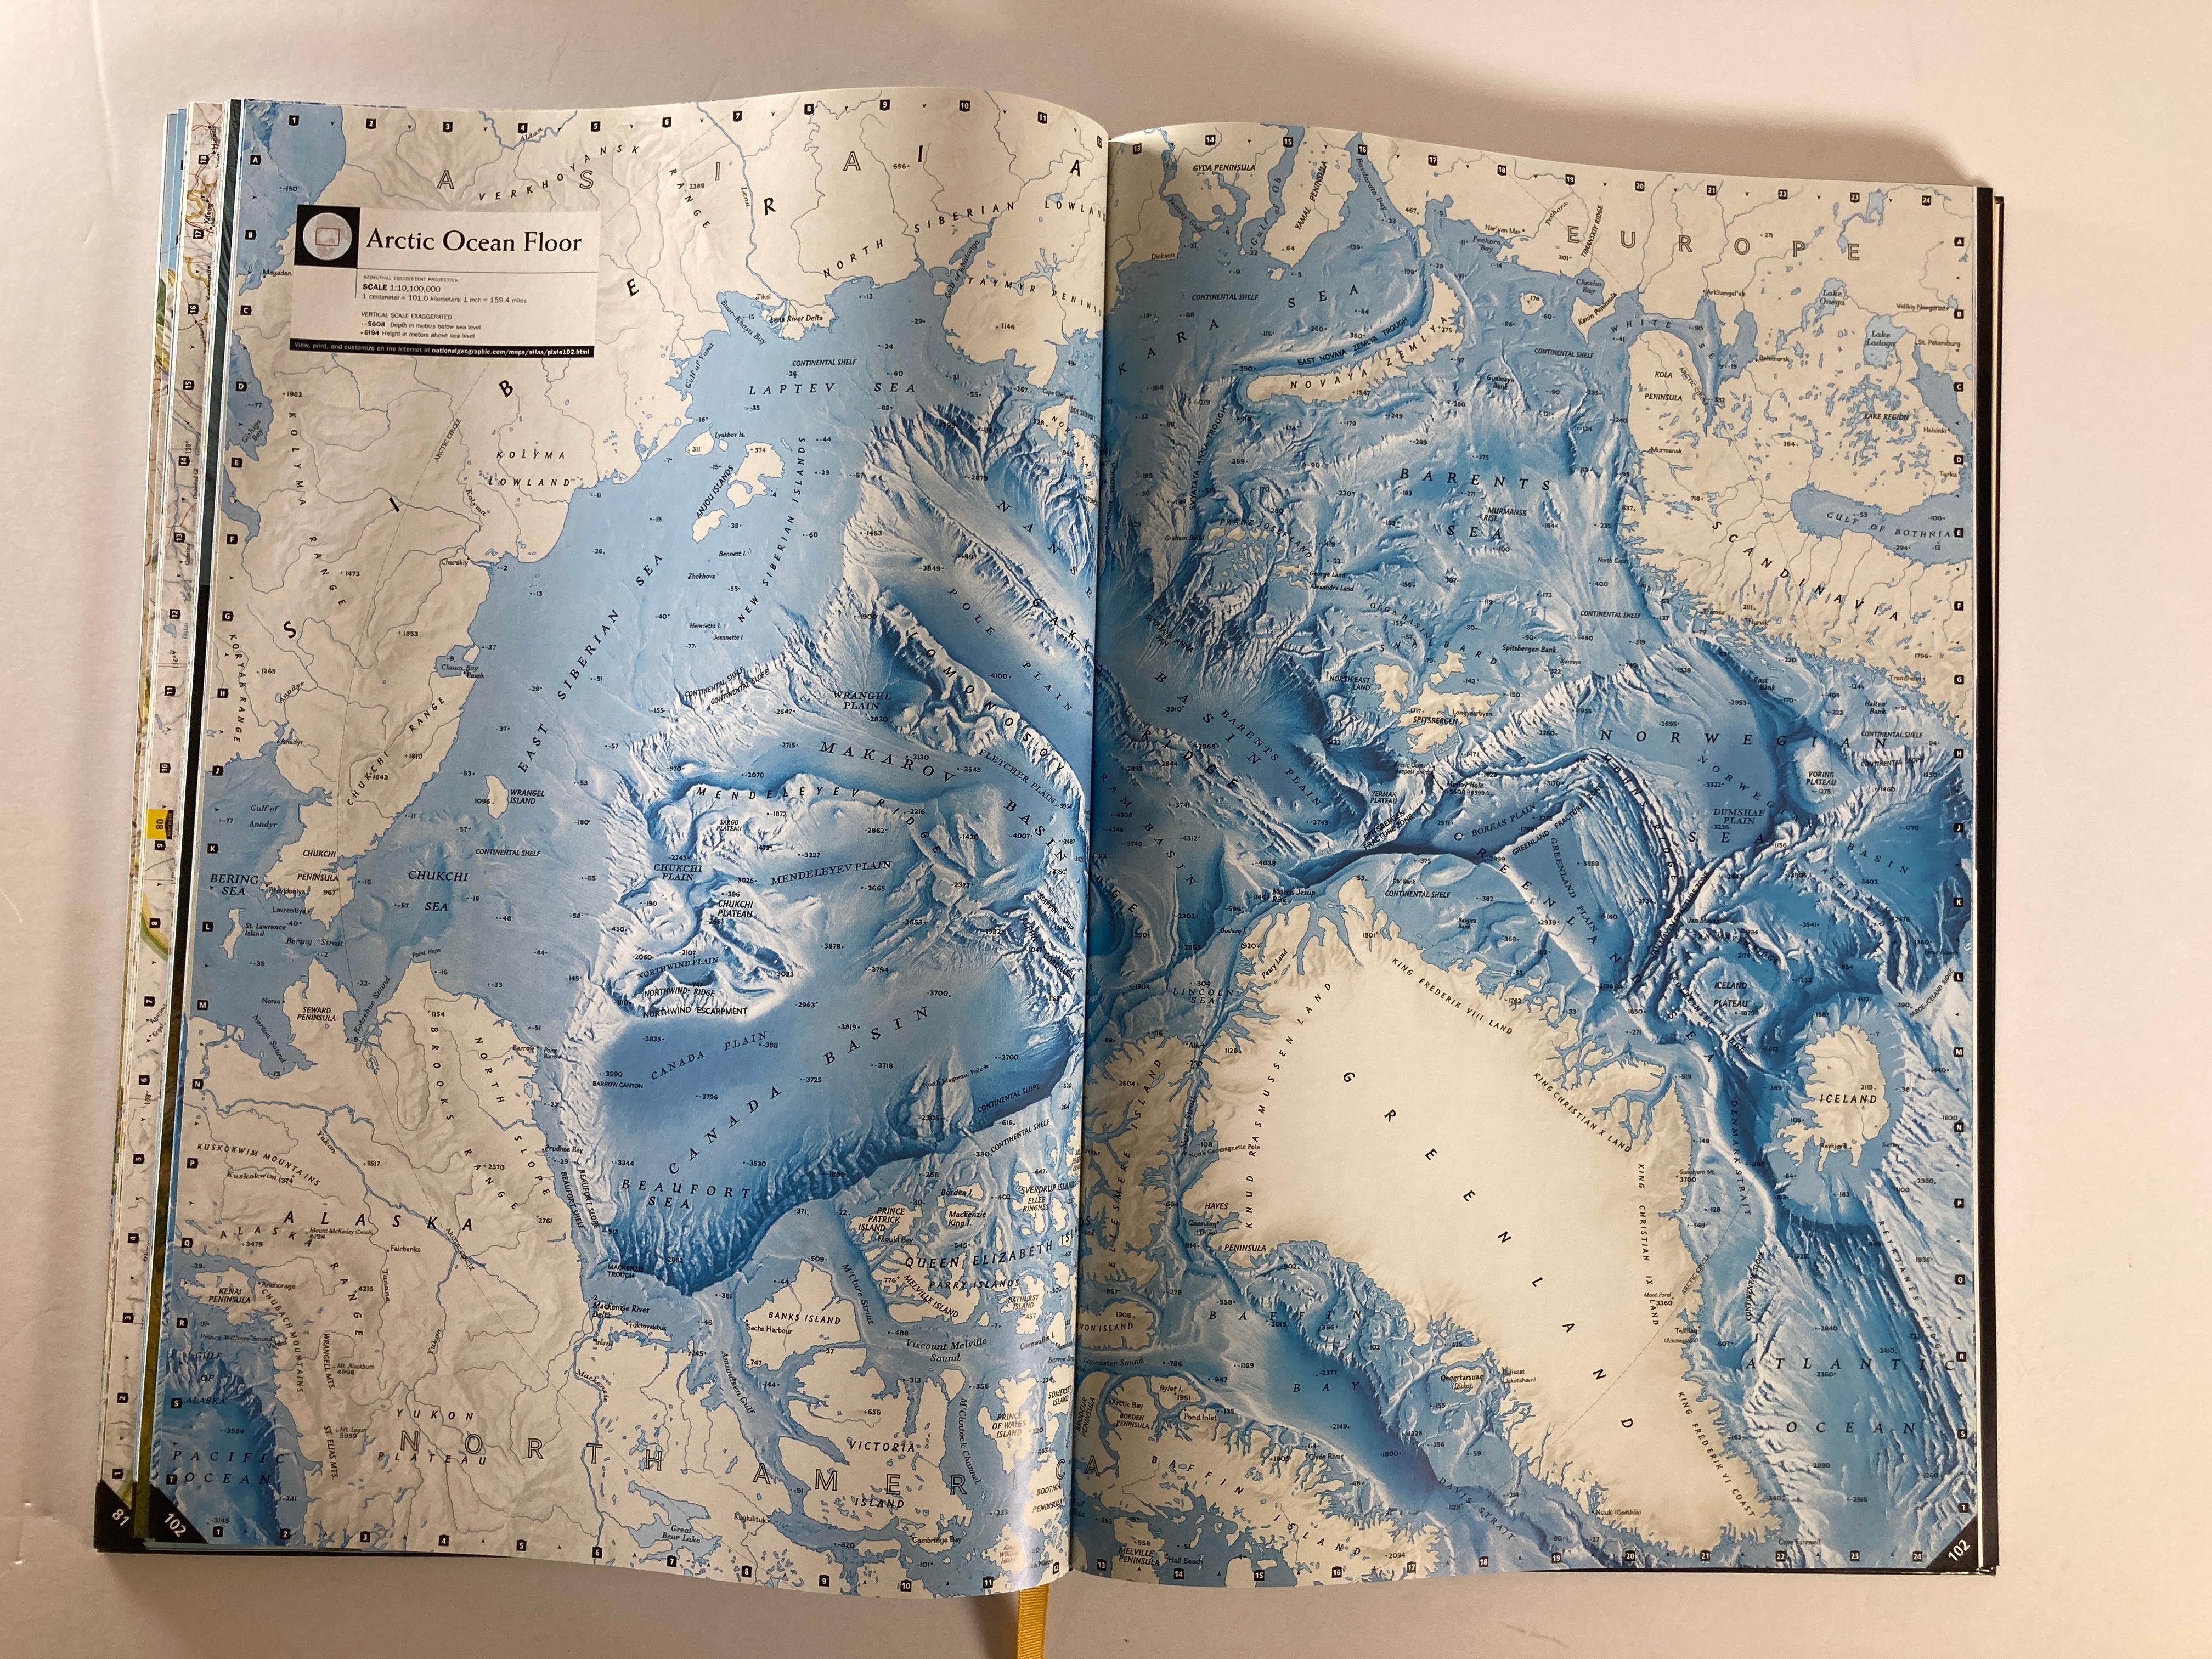 Paper National Geographic Atlas of the World, Eighth Edition Hardcover Book For Sale